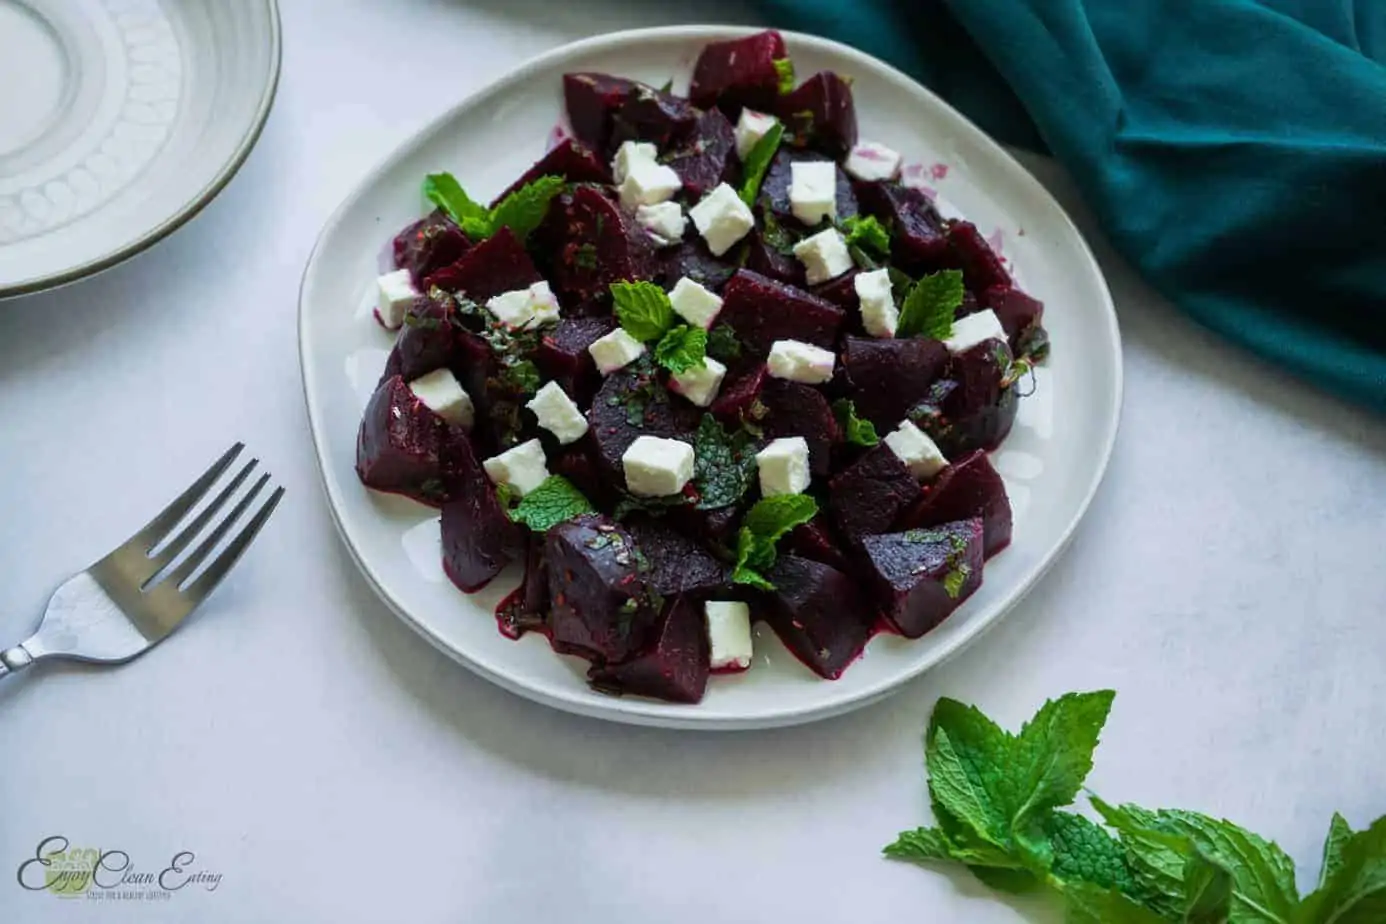 Feta and beet salad with fresh mint leave, a serving plate and a fork